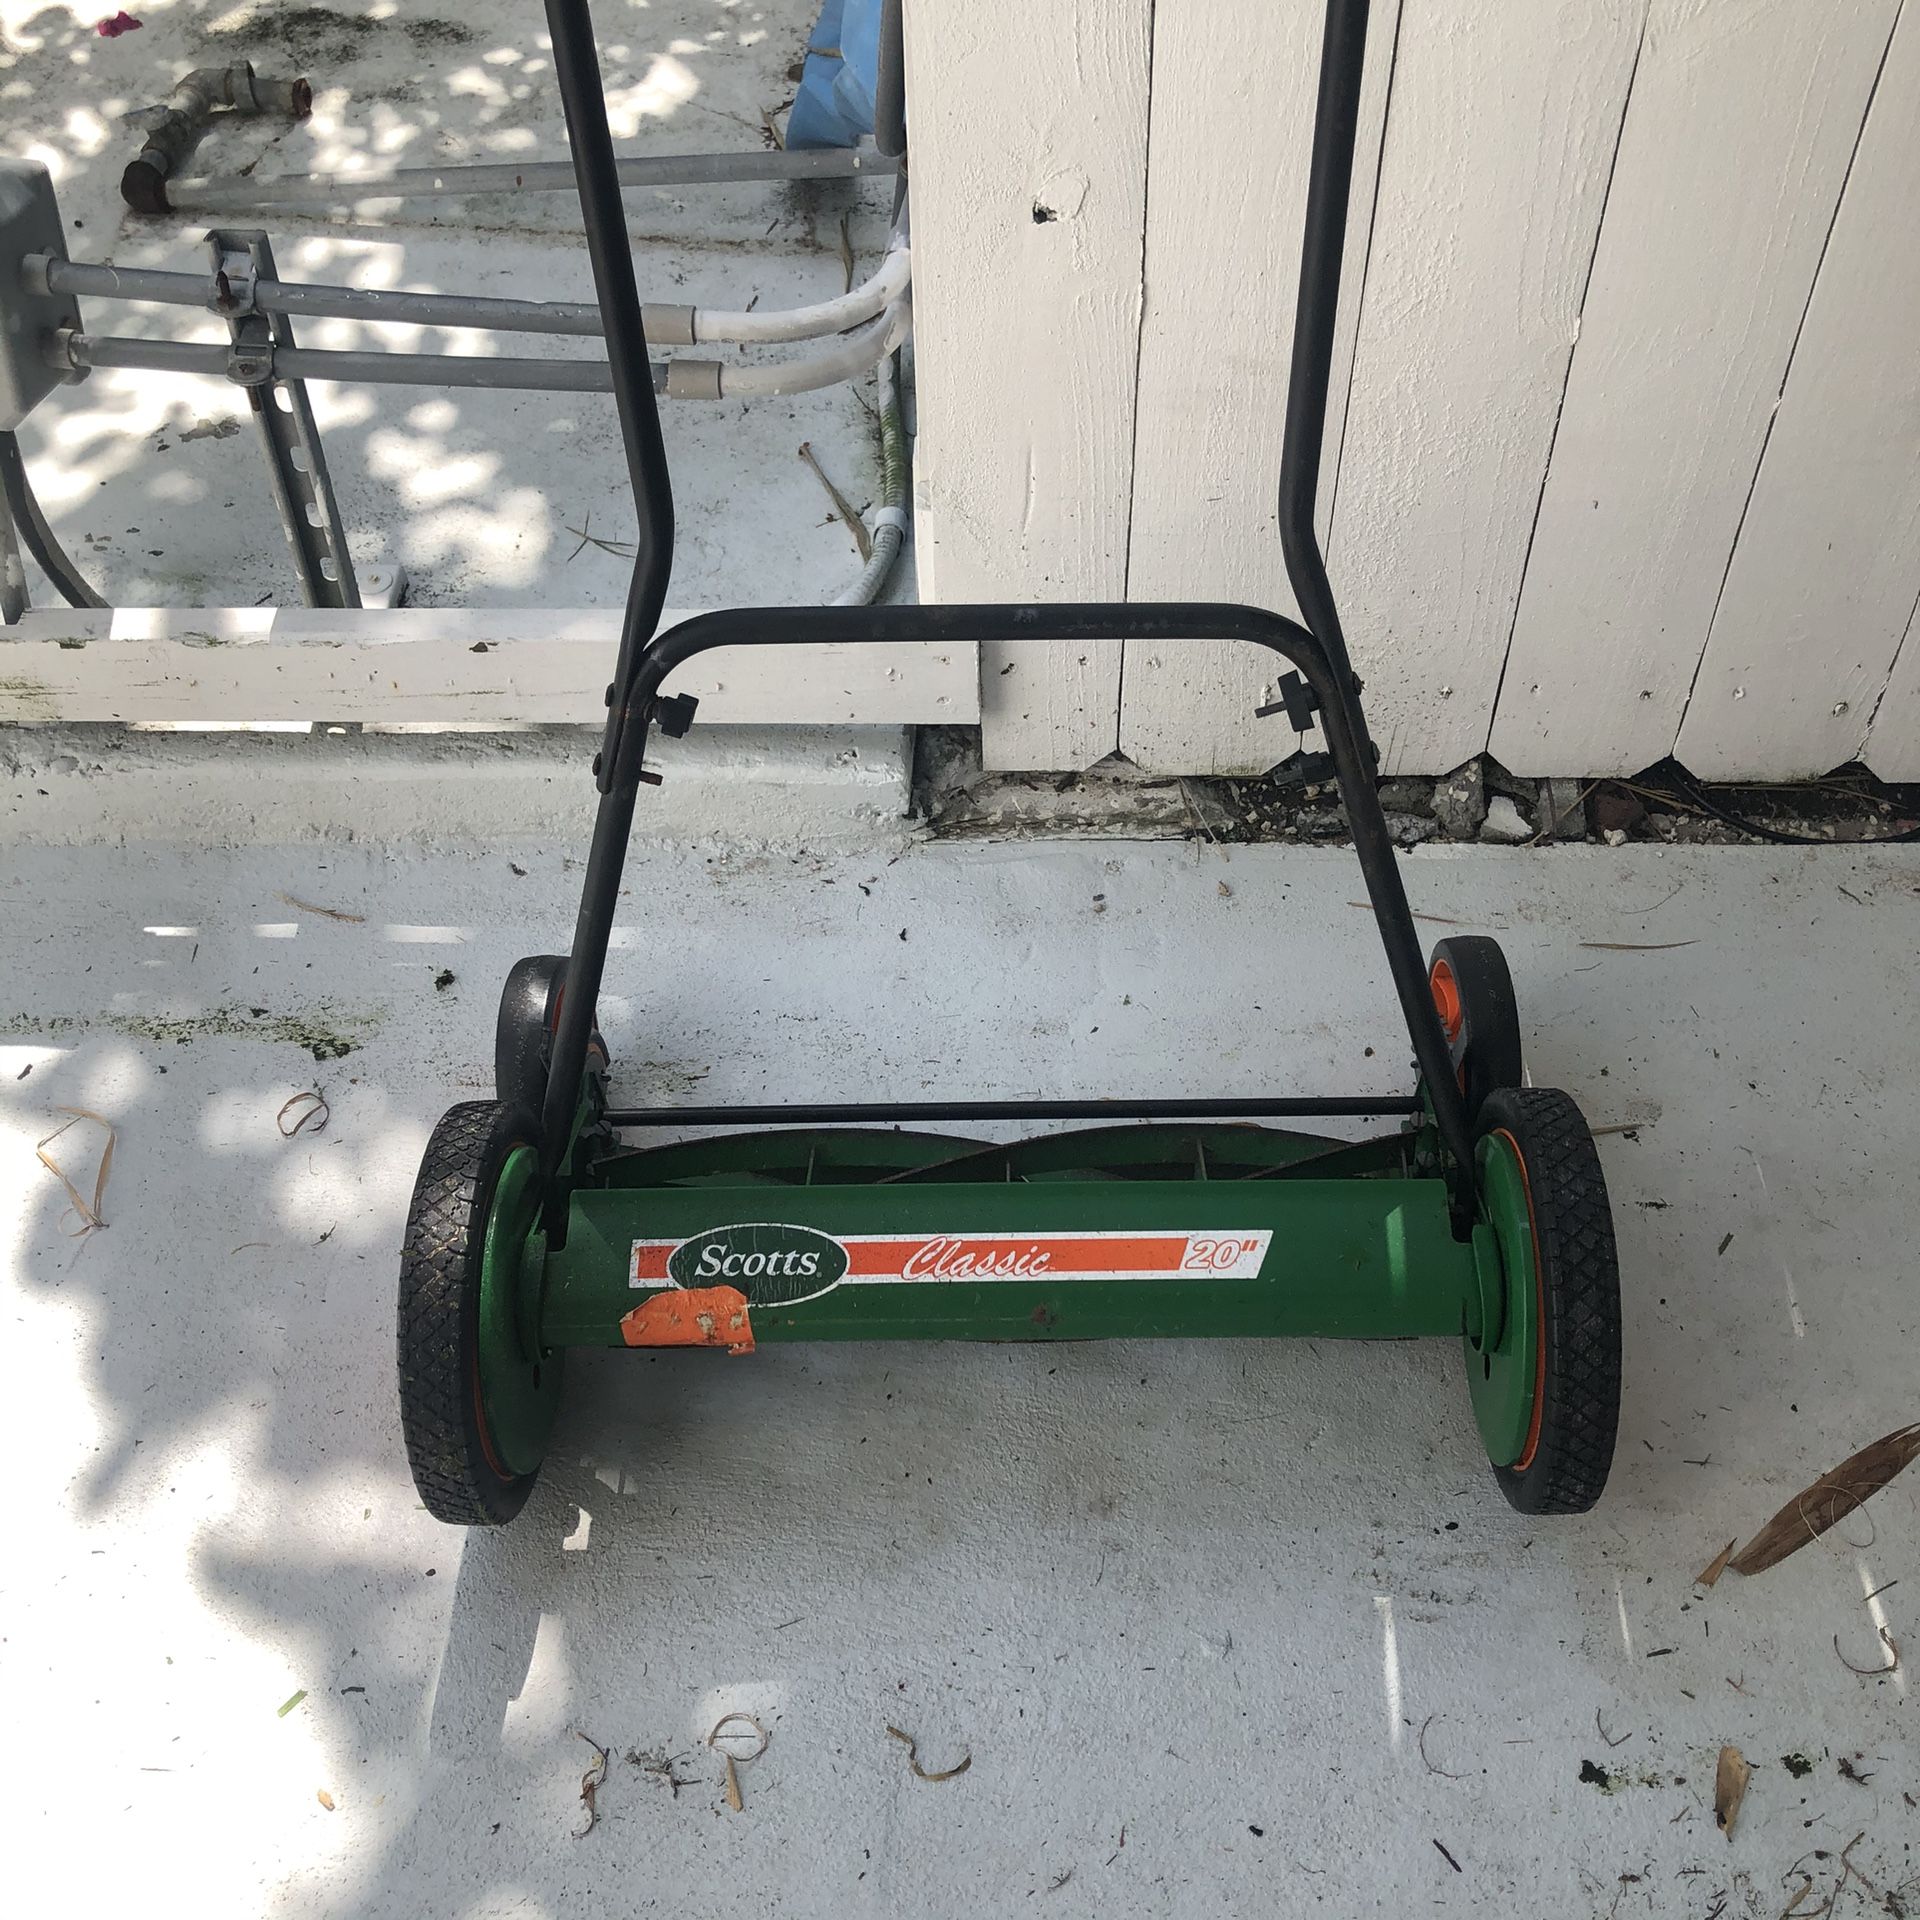 Scott’s classic 20 inch push mower in great condition. Works perfect. $140-$160 new